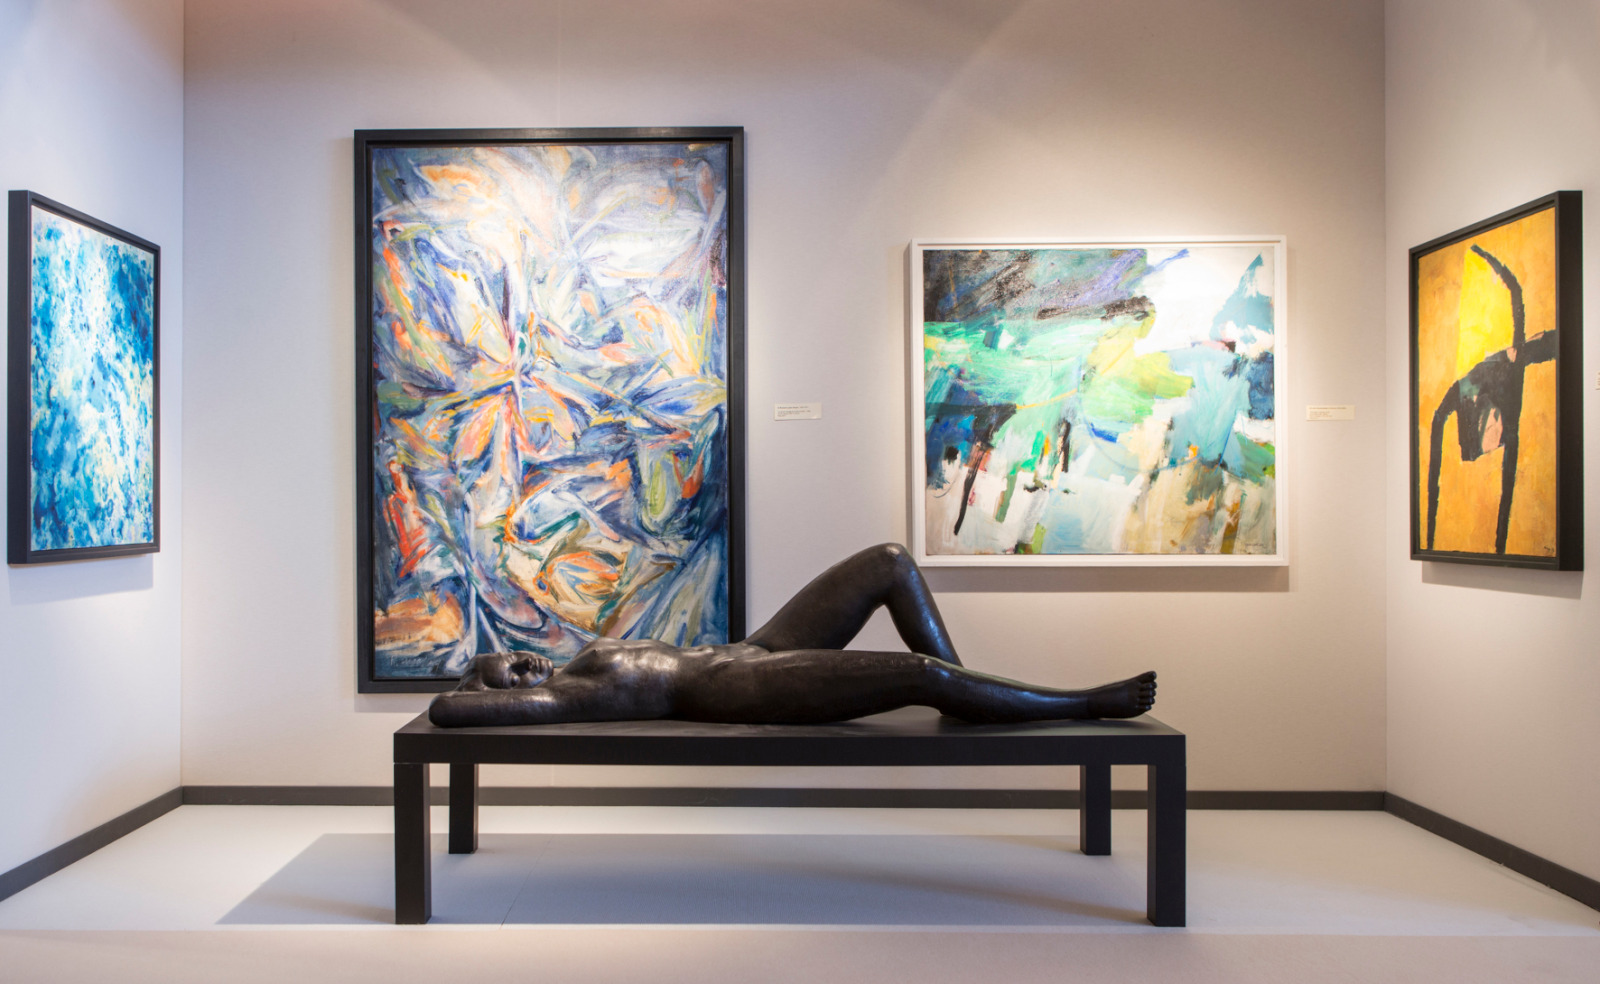 Stall exhibiting paintings and works of art at the Antica Namur Fine Art Fair